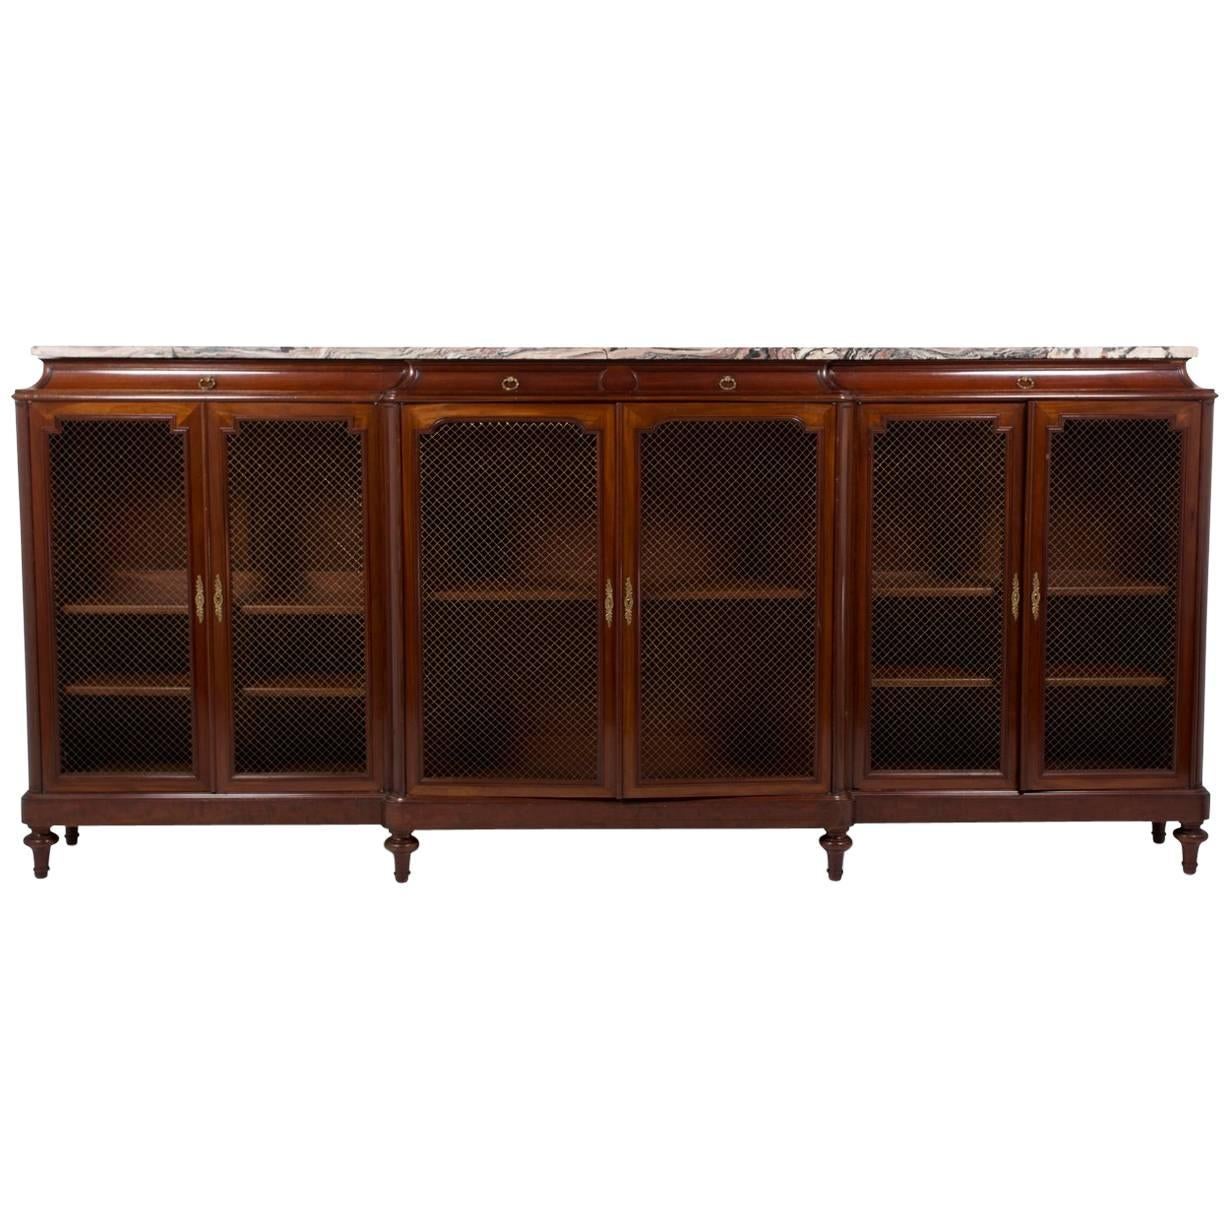 French Mahogany Six-Door Bookcase with Marble Top, circa 1920